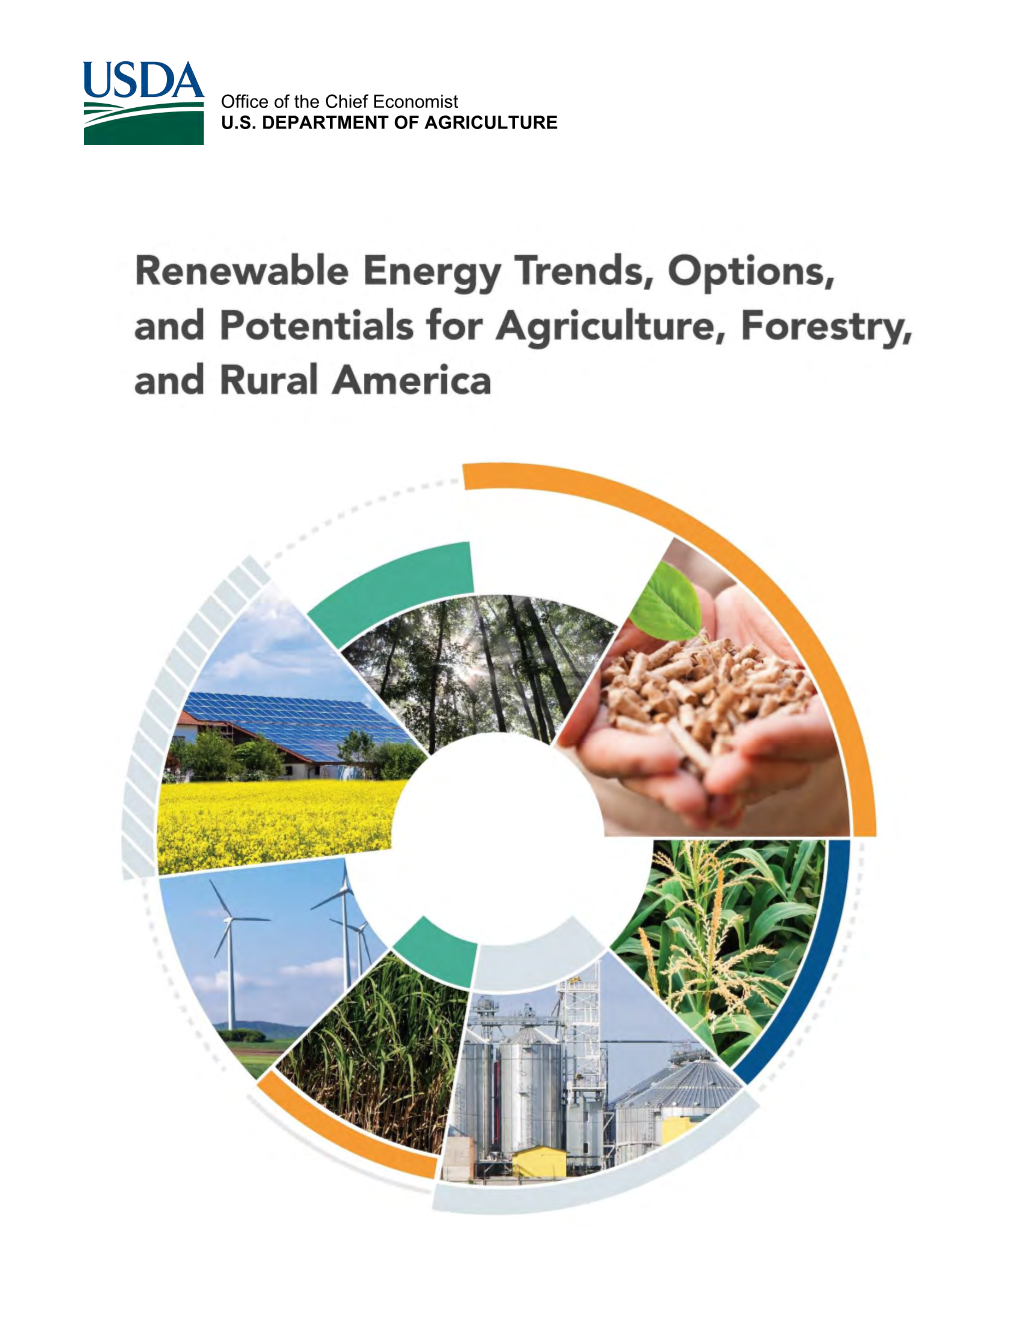 Renewable Energy Trends, Options, and Potentials for Agriculture, Forestry, and Rural America